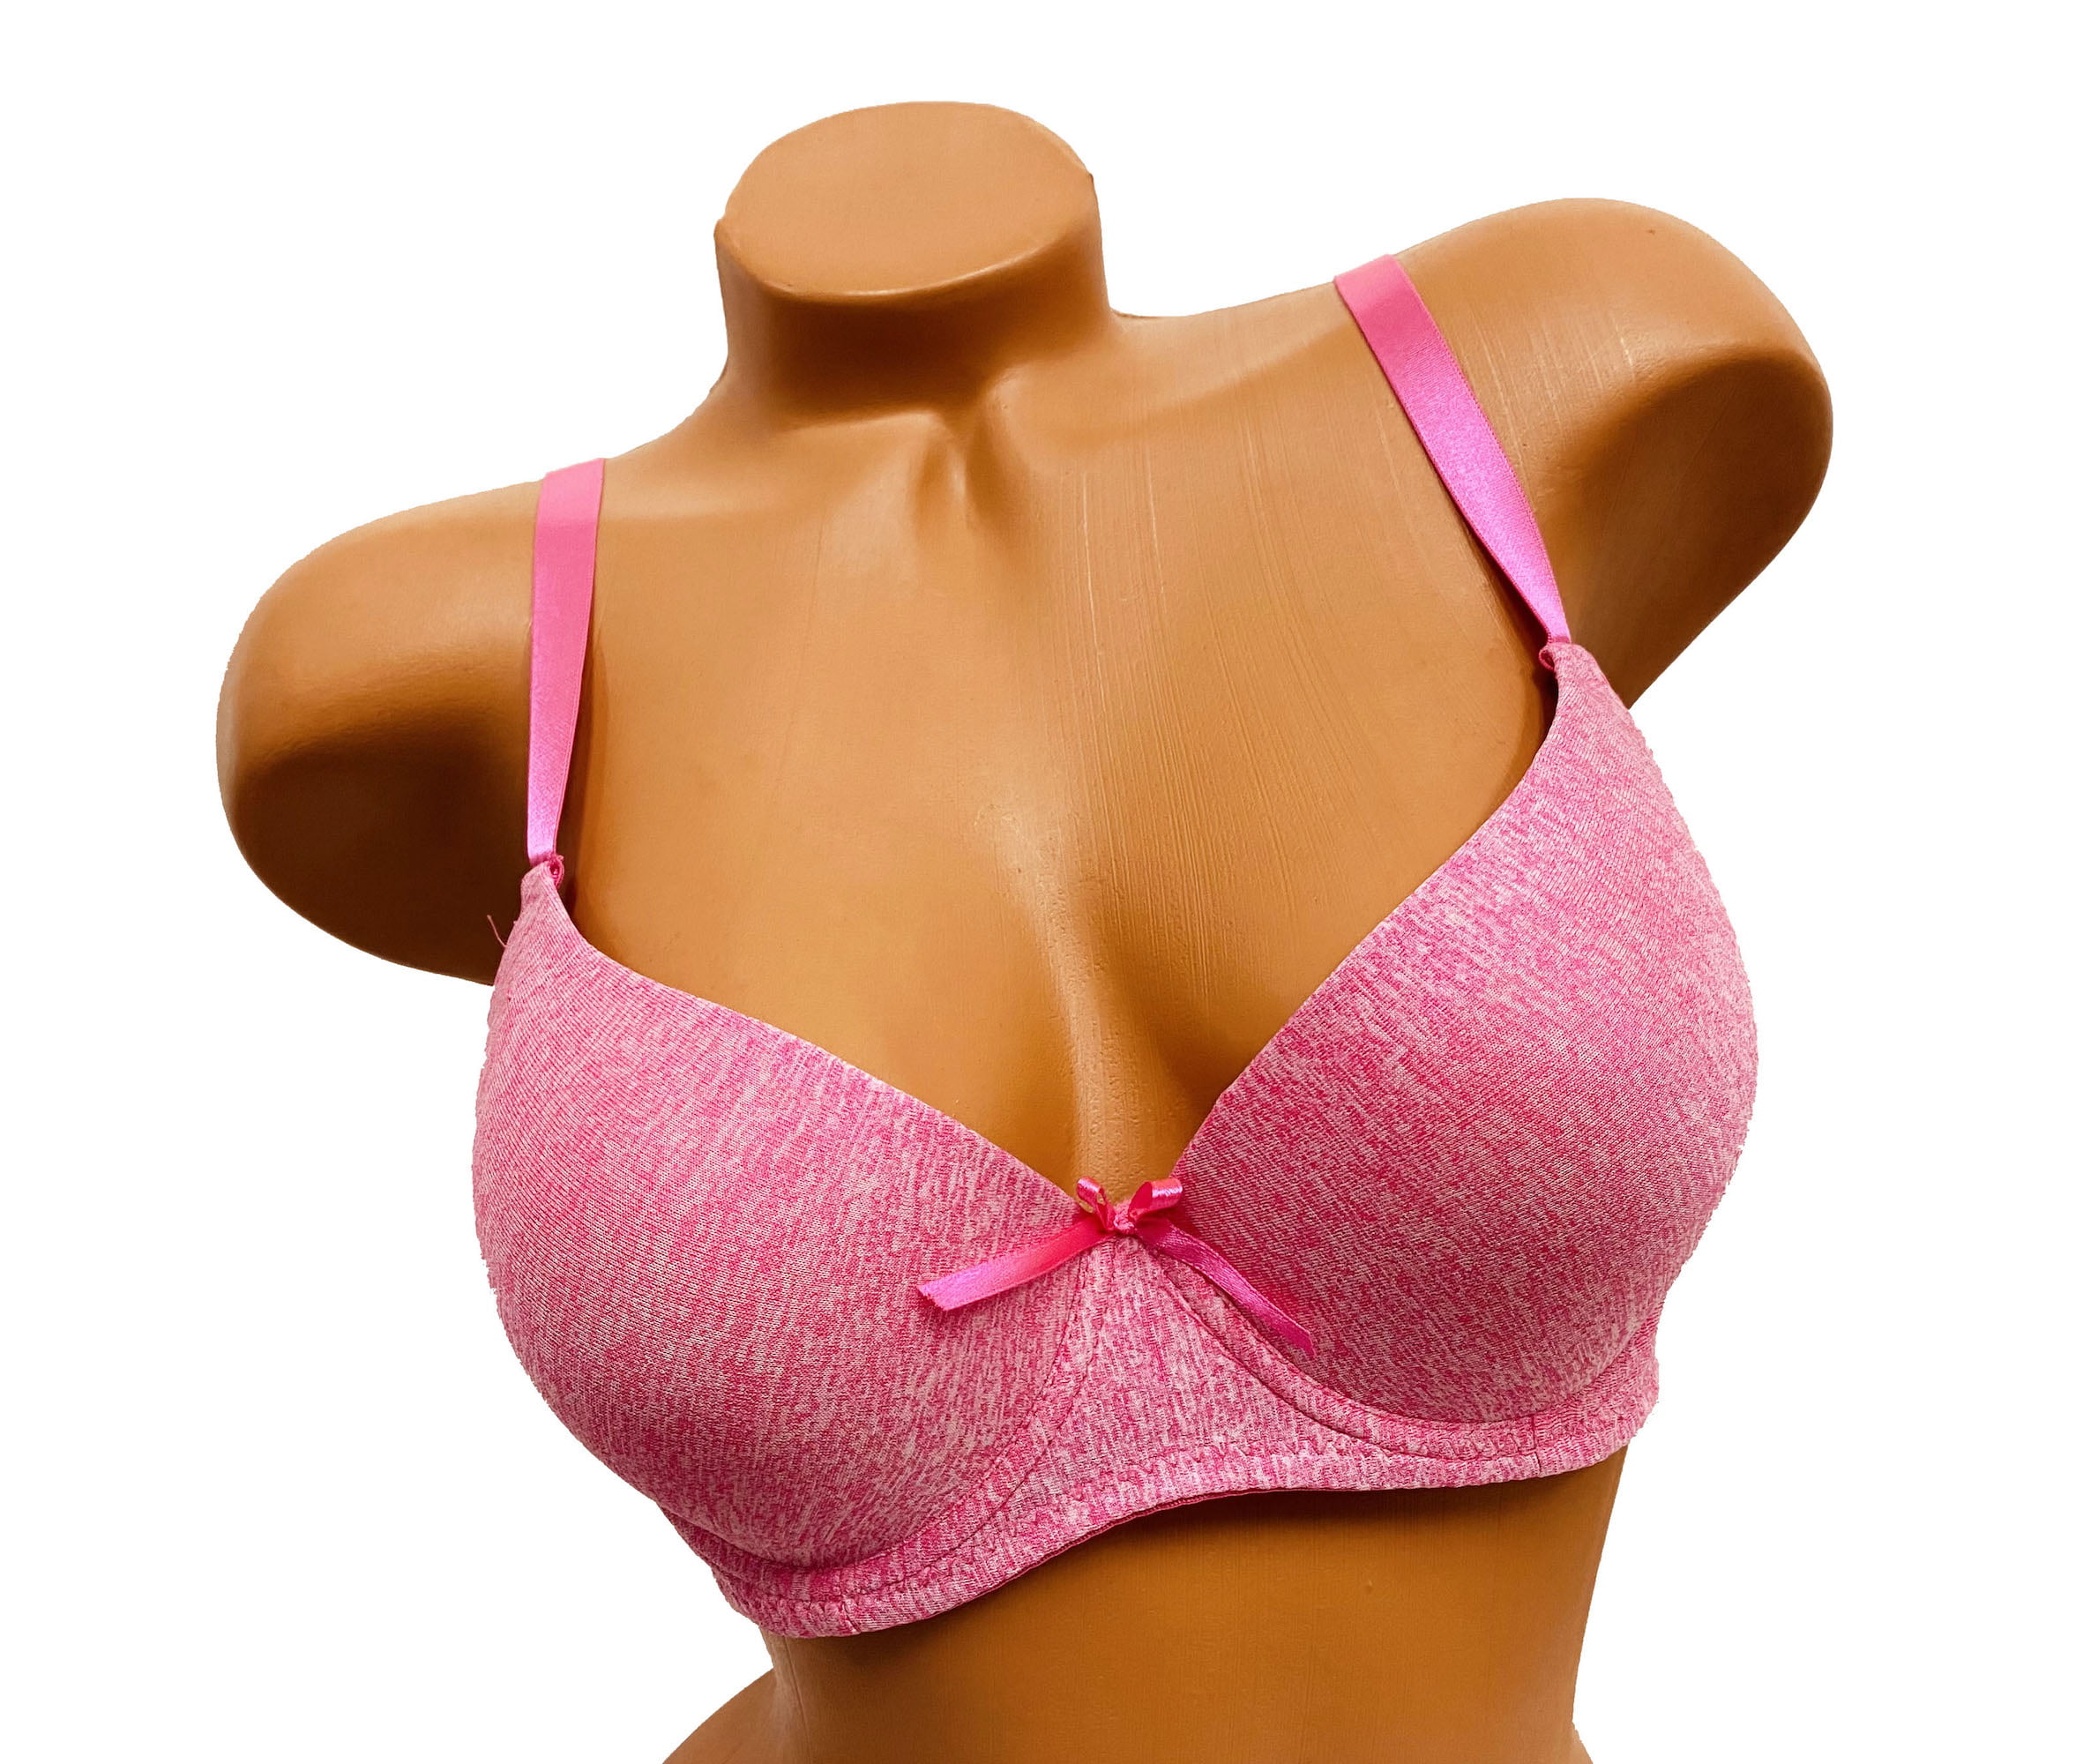 Women Bras 6 pack of T-shirt Bra B cup C cup D cup DD cup DDD cup Size  38DDD (9290)